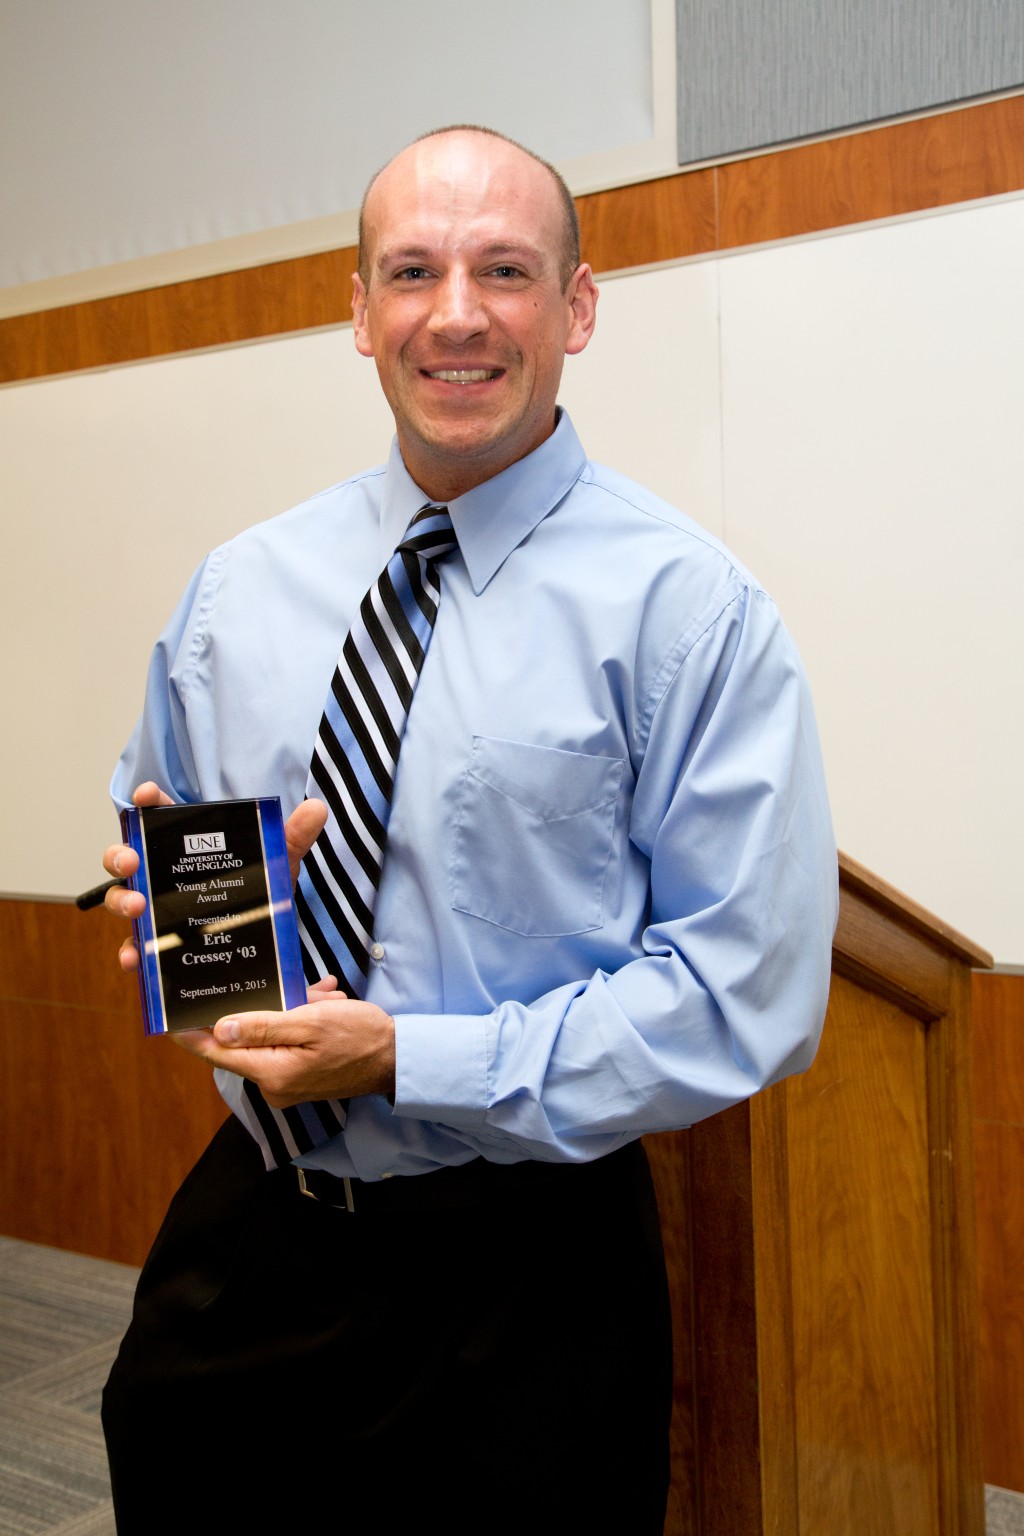 Eric Cressey received the UNE Young Alumni Achievement Award in 2015